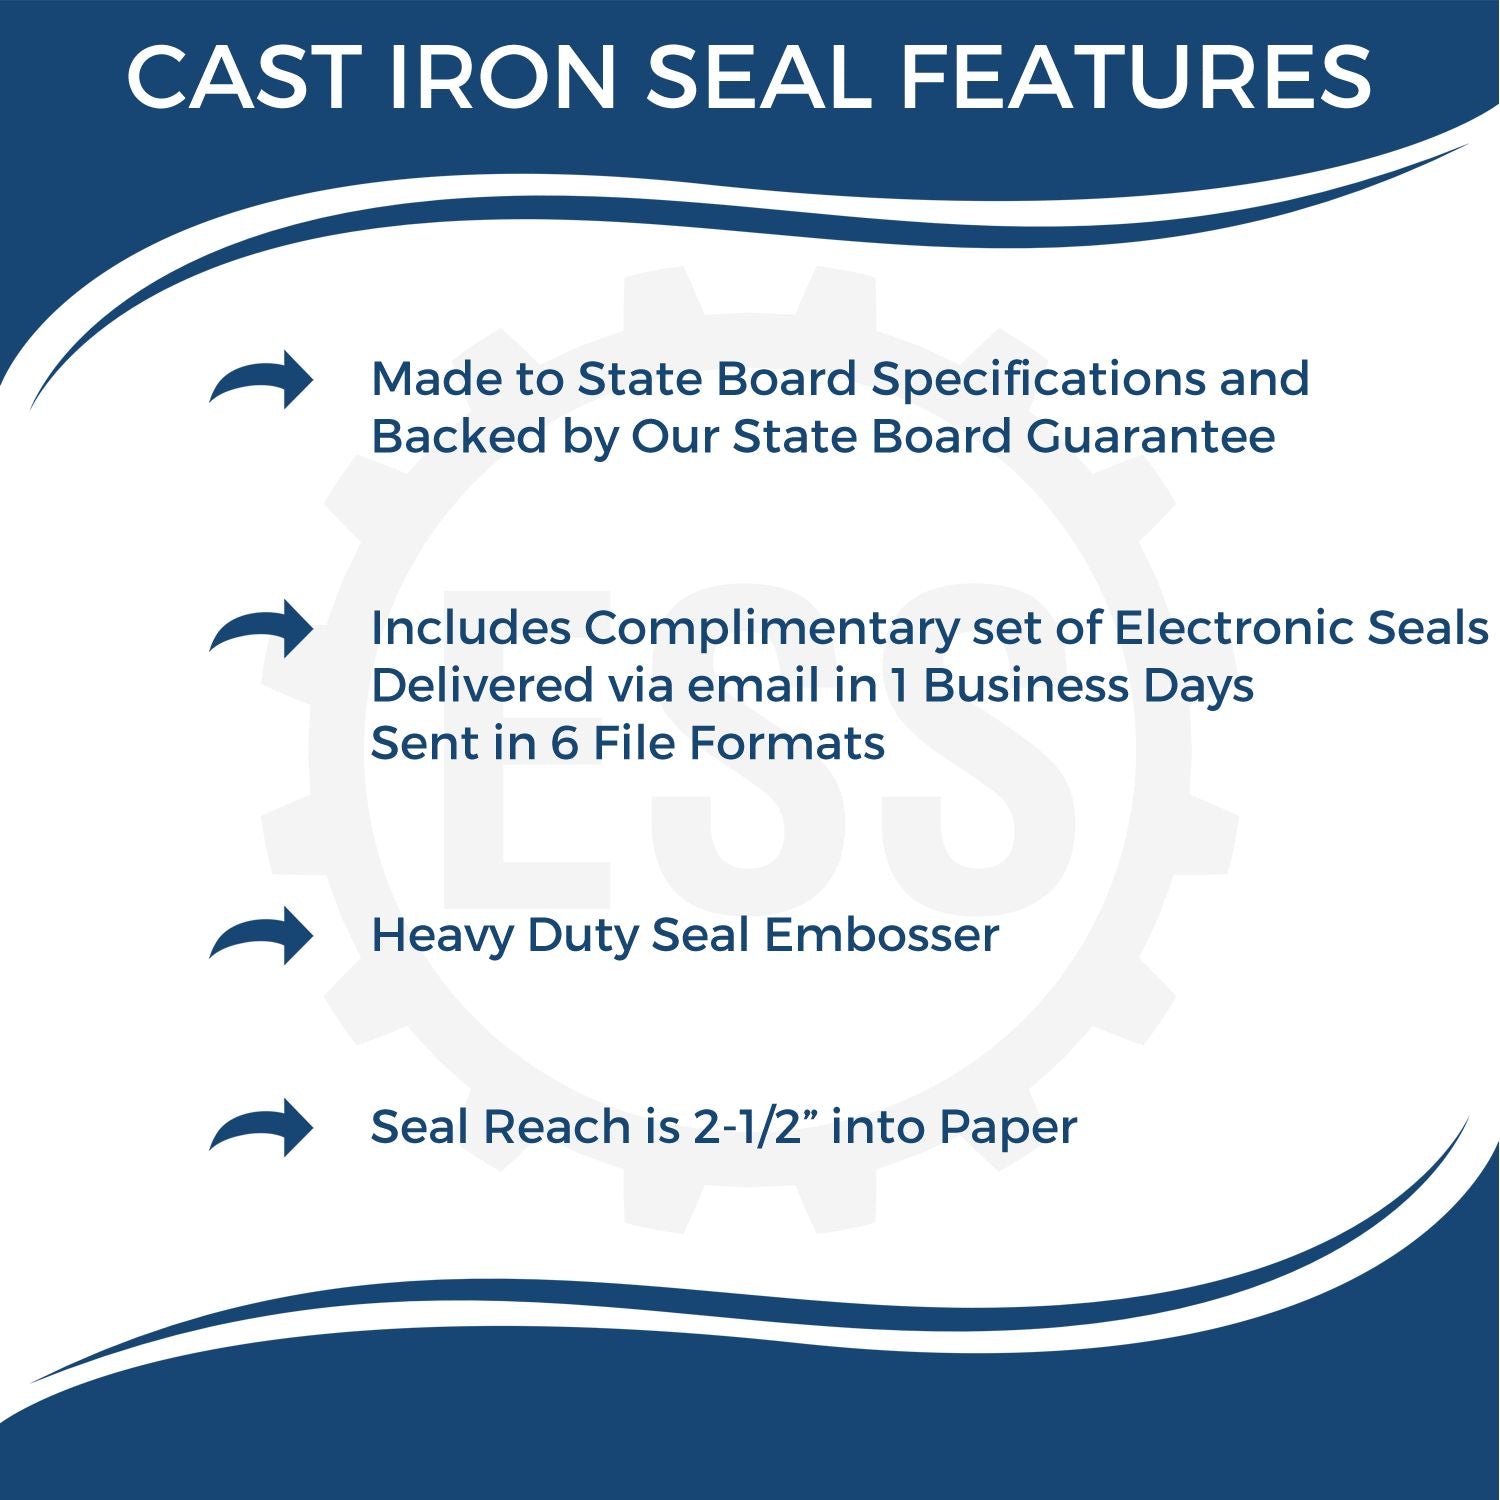 The main image for the Heavy Duty Cast Iron Kentucky Land Surveyor Seal Embosser depicting a sample of the imprint and electronic files